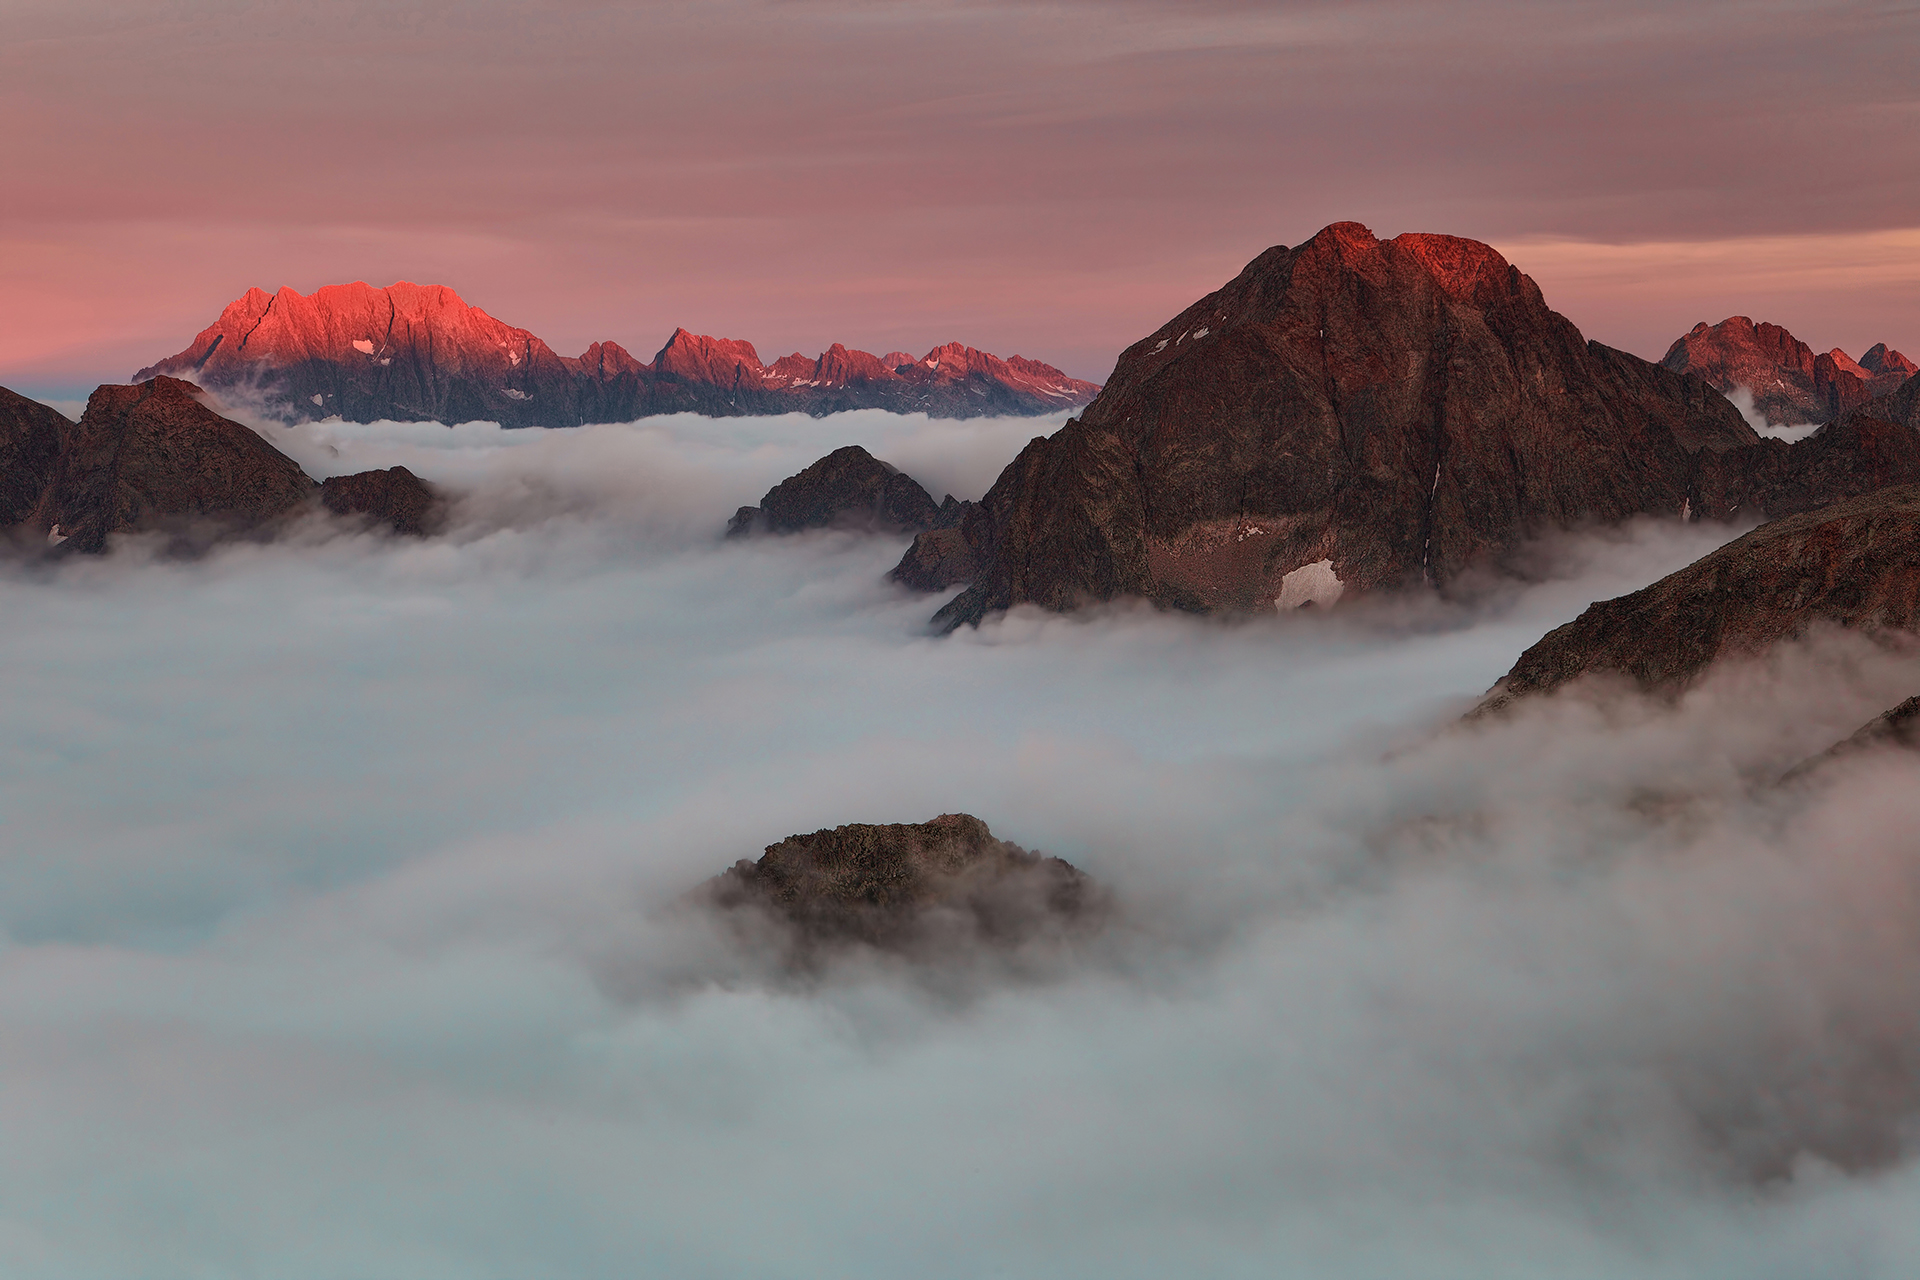 The Maritime Alps emerge from the mists...